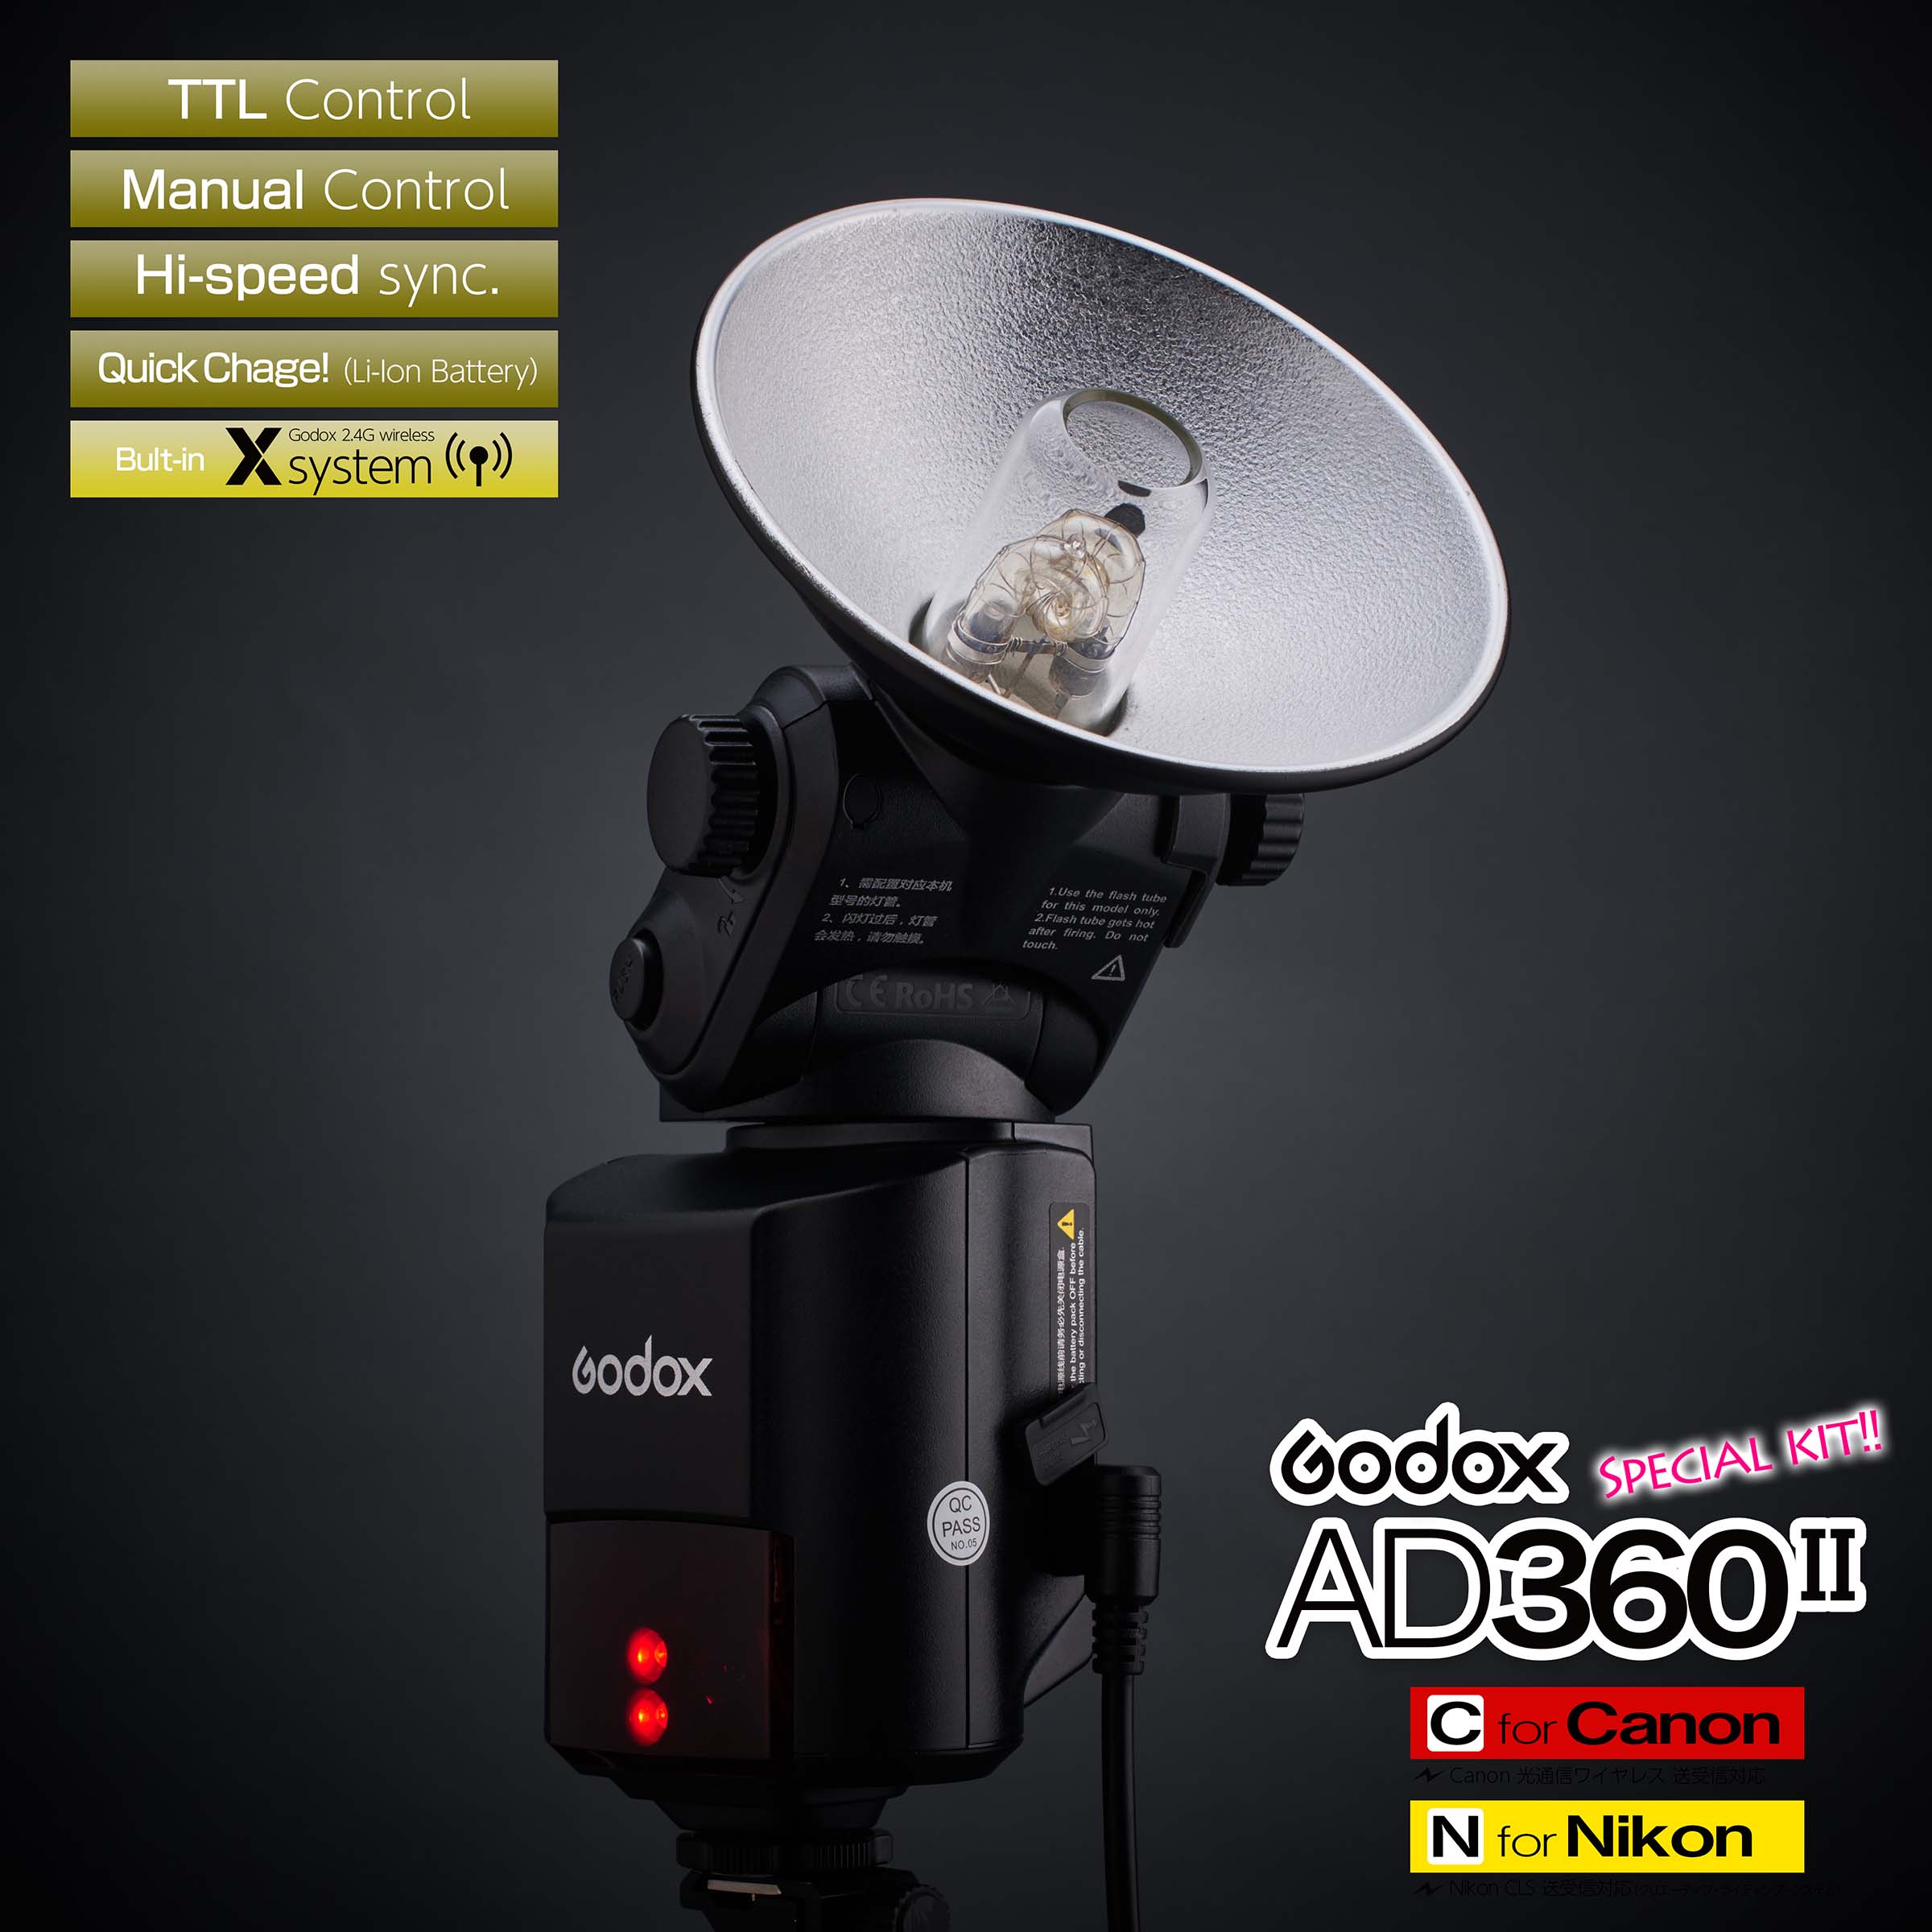 360Wsバッテリーストロボ 「Godox AD360 Ⅱ SPECIALキット」 for Canon